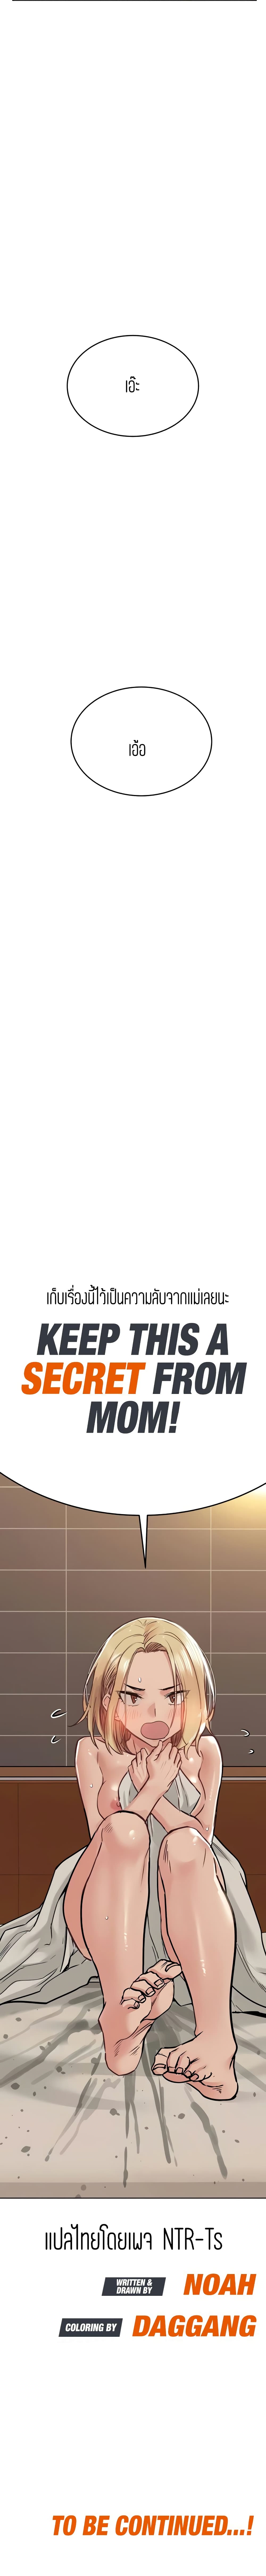 Keep it a secret from your mother! 24 ภาพที่ 20